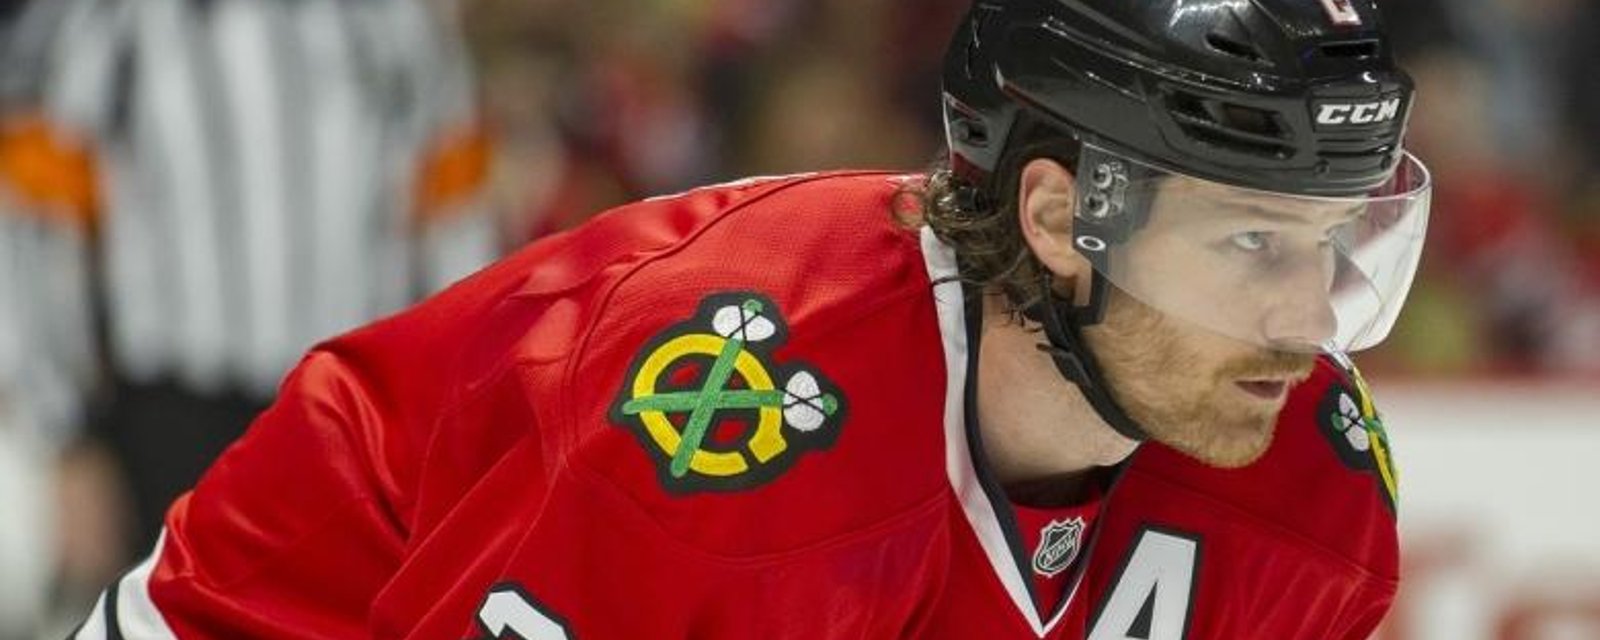 Bad news for Duncan Keith after his ugly cheap shot.